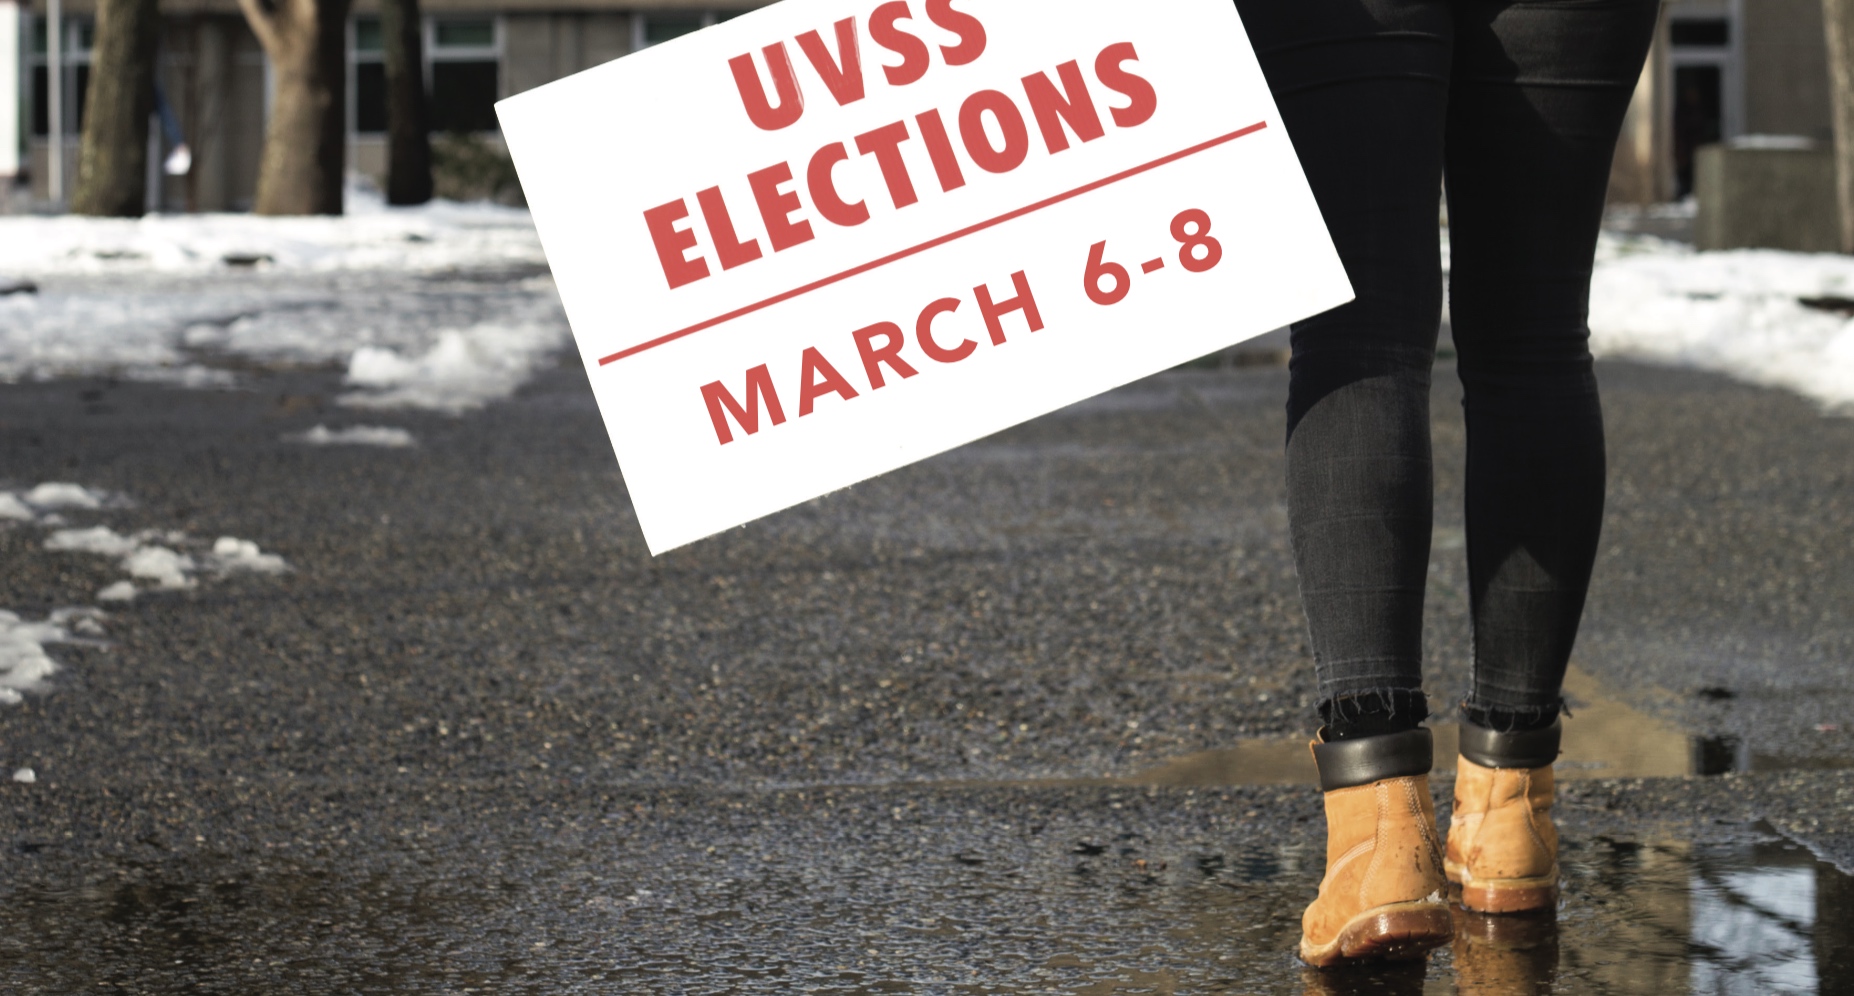 Welcome to the wild world of UVSS elections